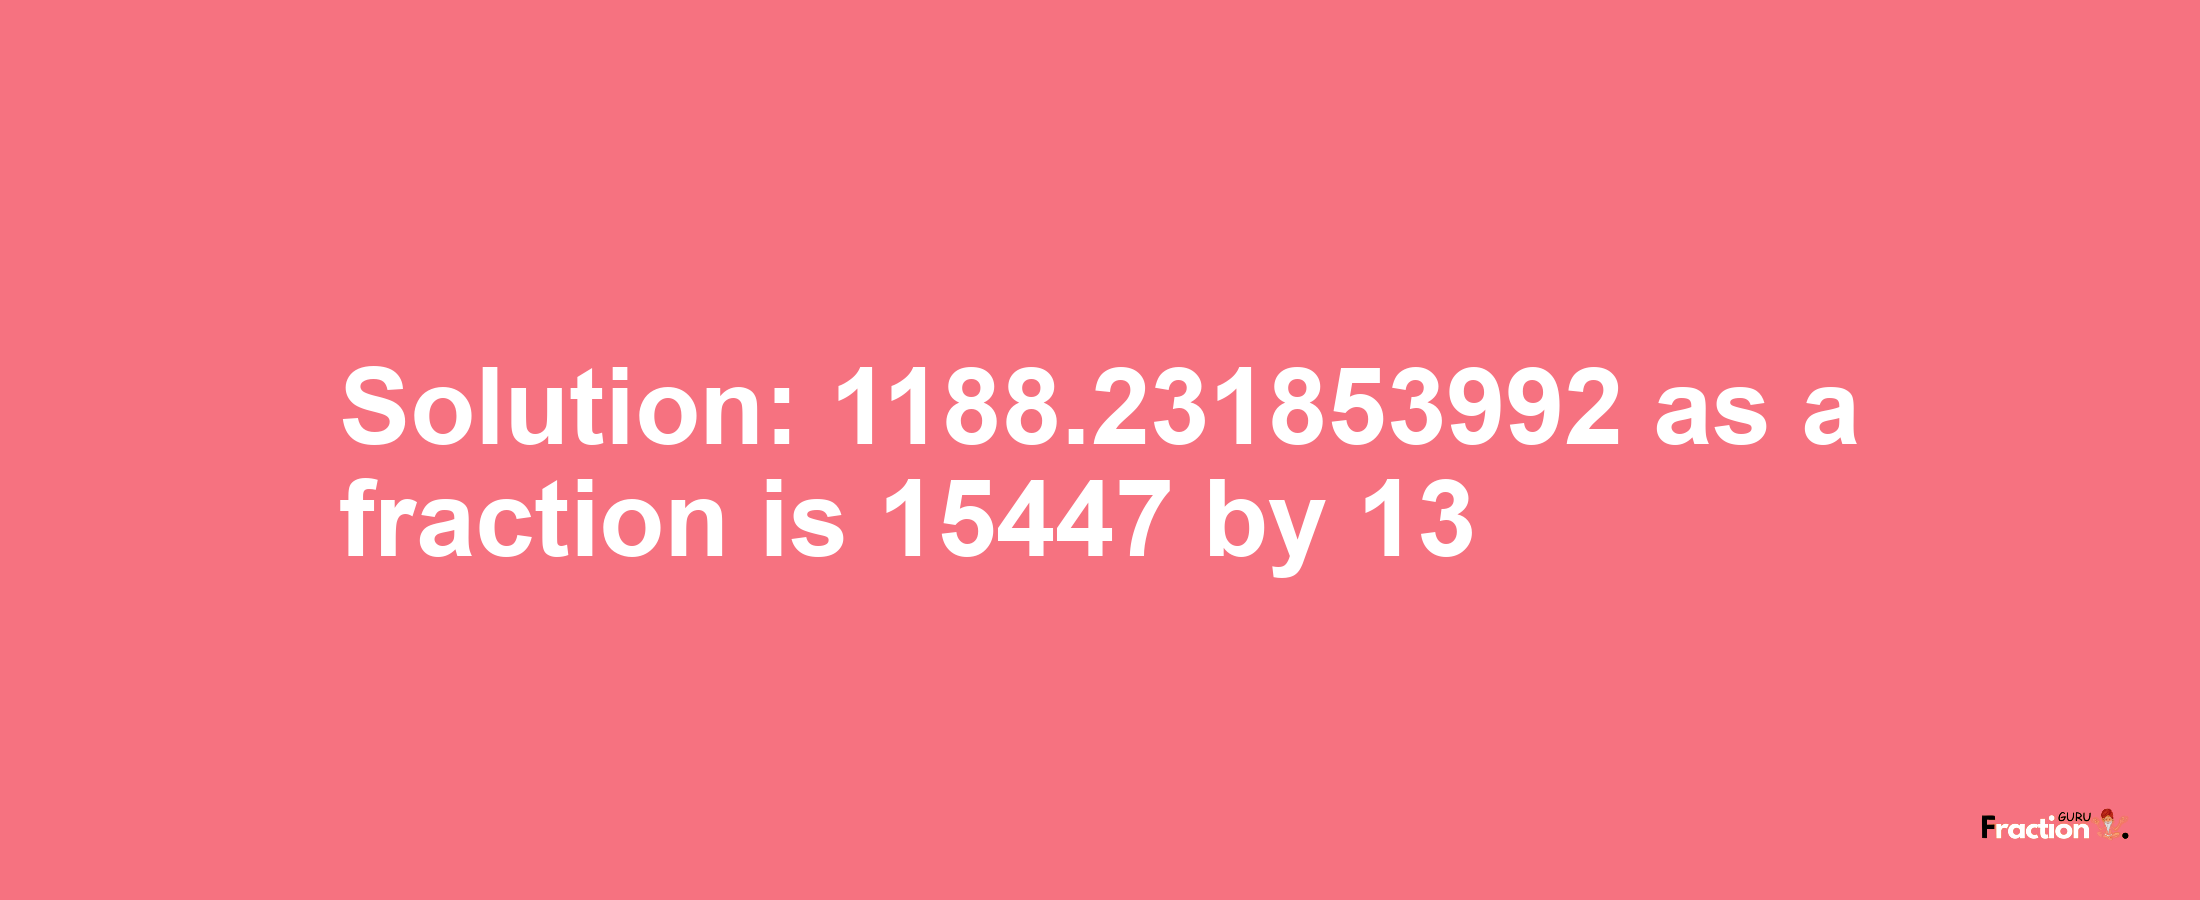 Solution:1188.231853992 as a fraction is 15447/13